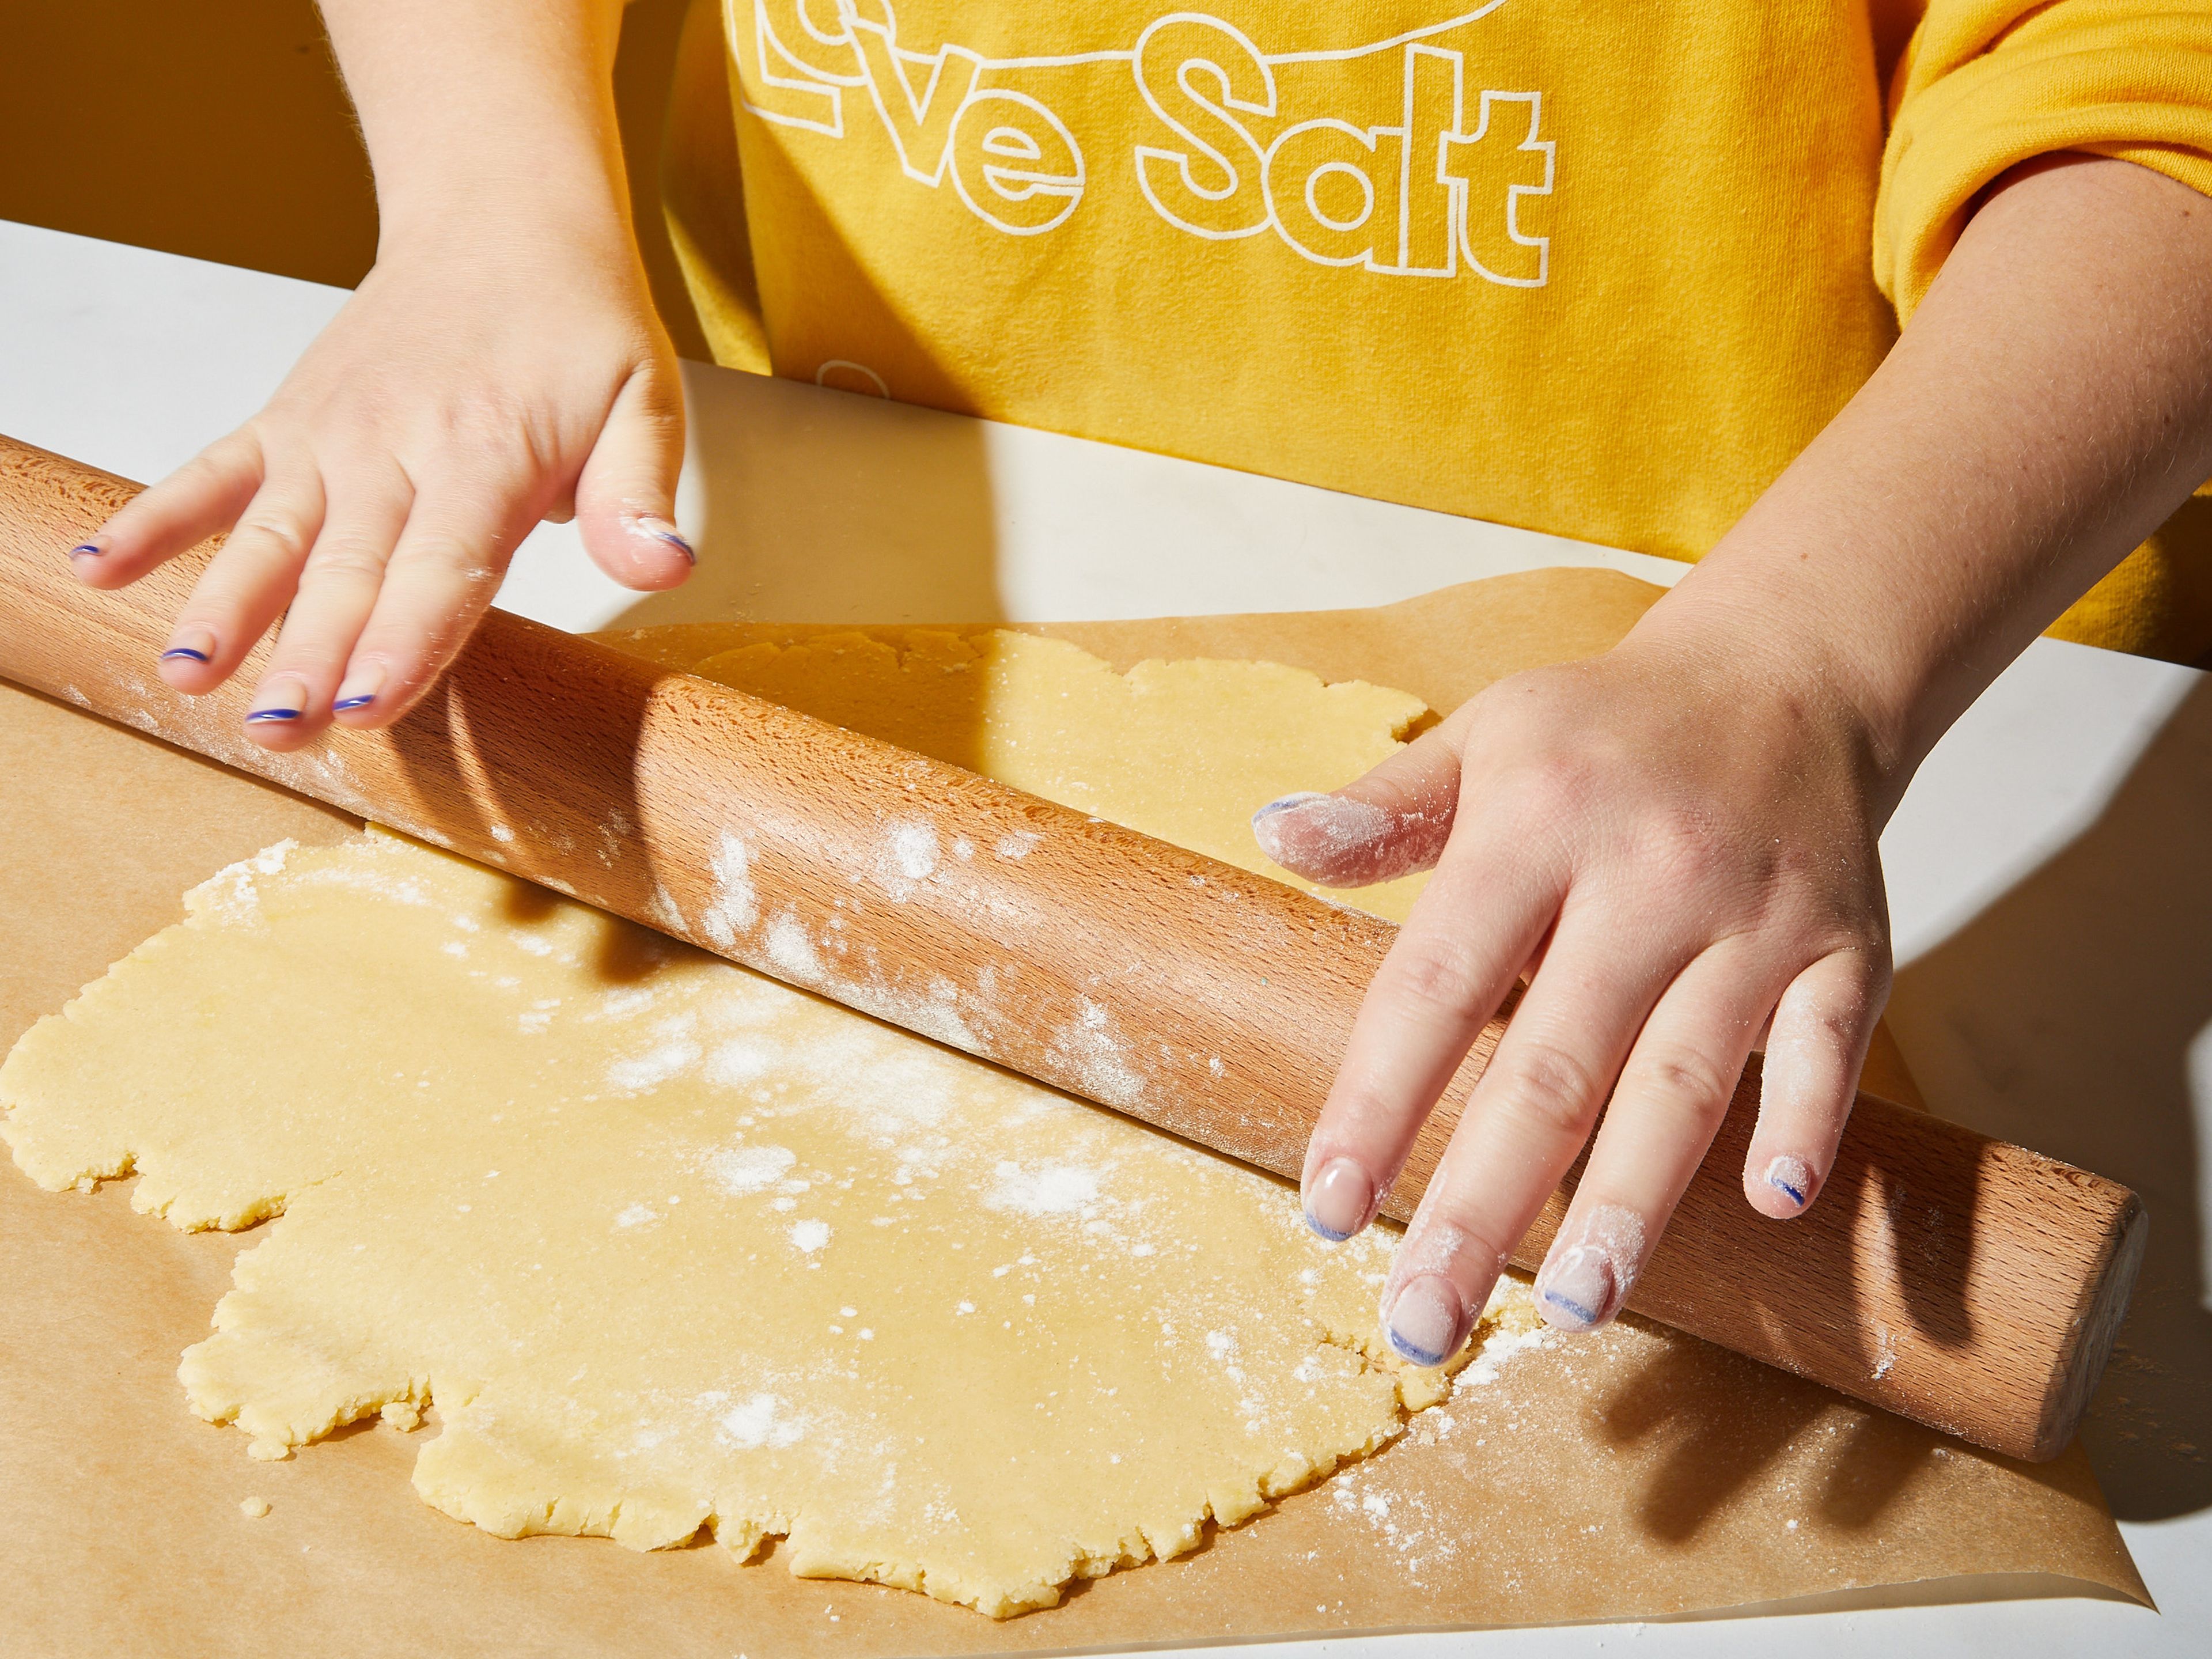 Preheat oven to 180°C/350°F. Divide dough in half and roll out each half thinly, either onto one sheet of parchment paper, or between two sheets, to prevent sticking and make it easier to transfer to the baking sheet.